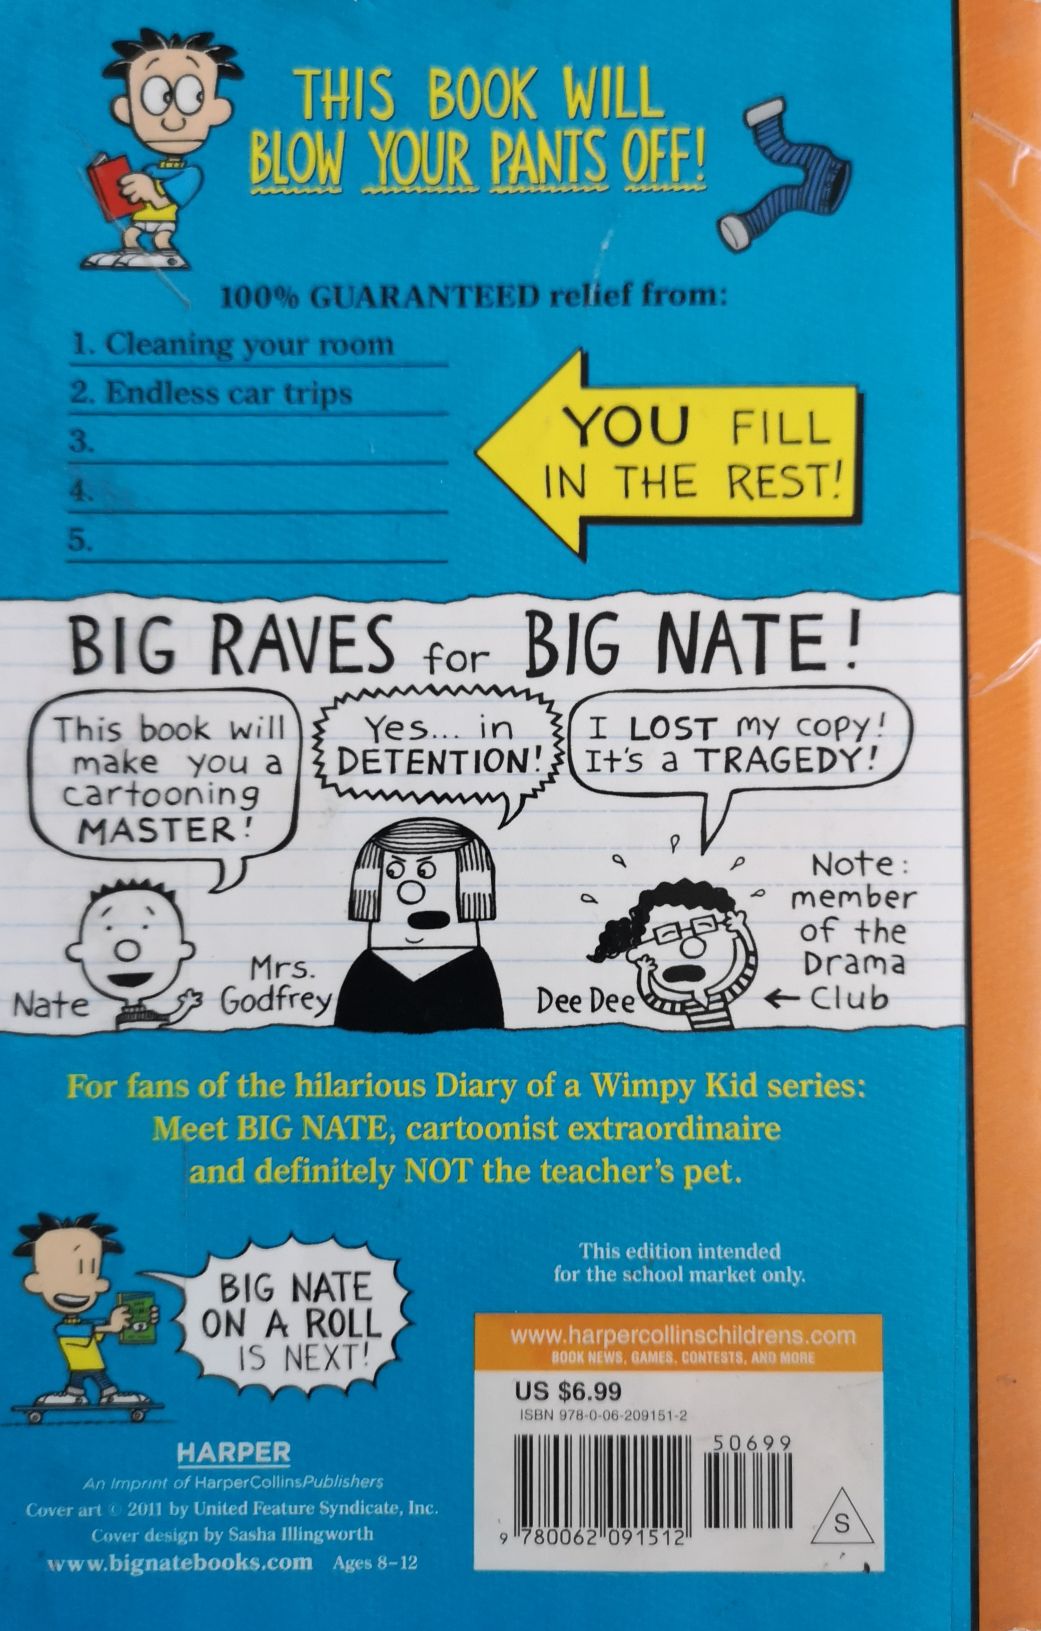 Big Nate: Boredom Buster - Lincoln Peirce (Harper - Paperback) book collectible [Barcode 9780062091512] - Main Image 2